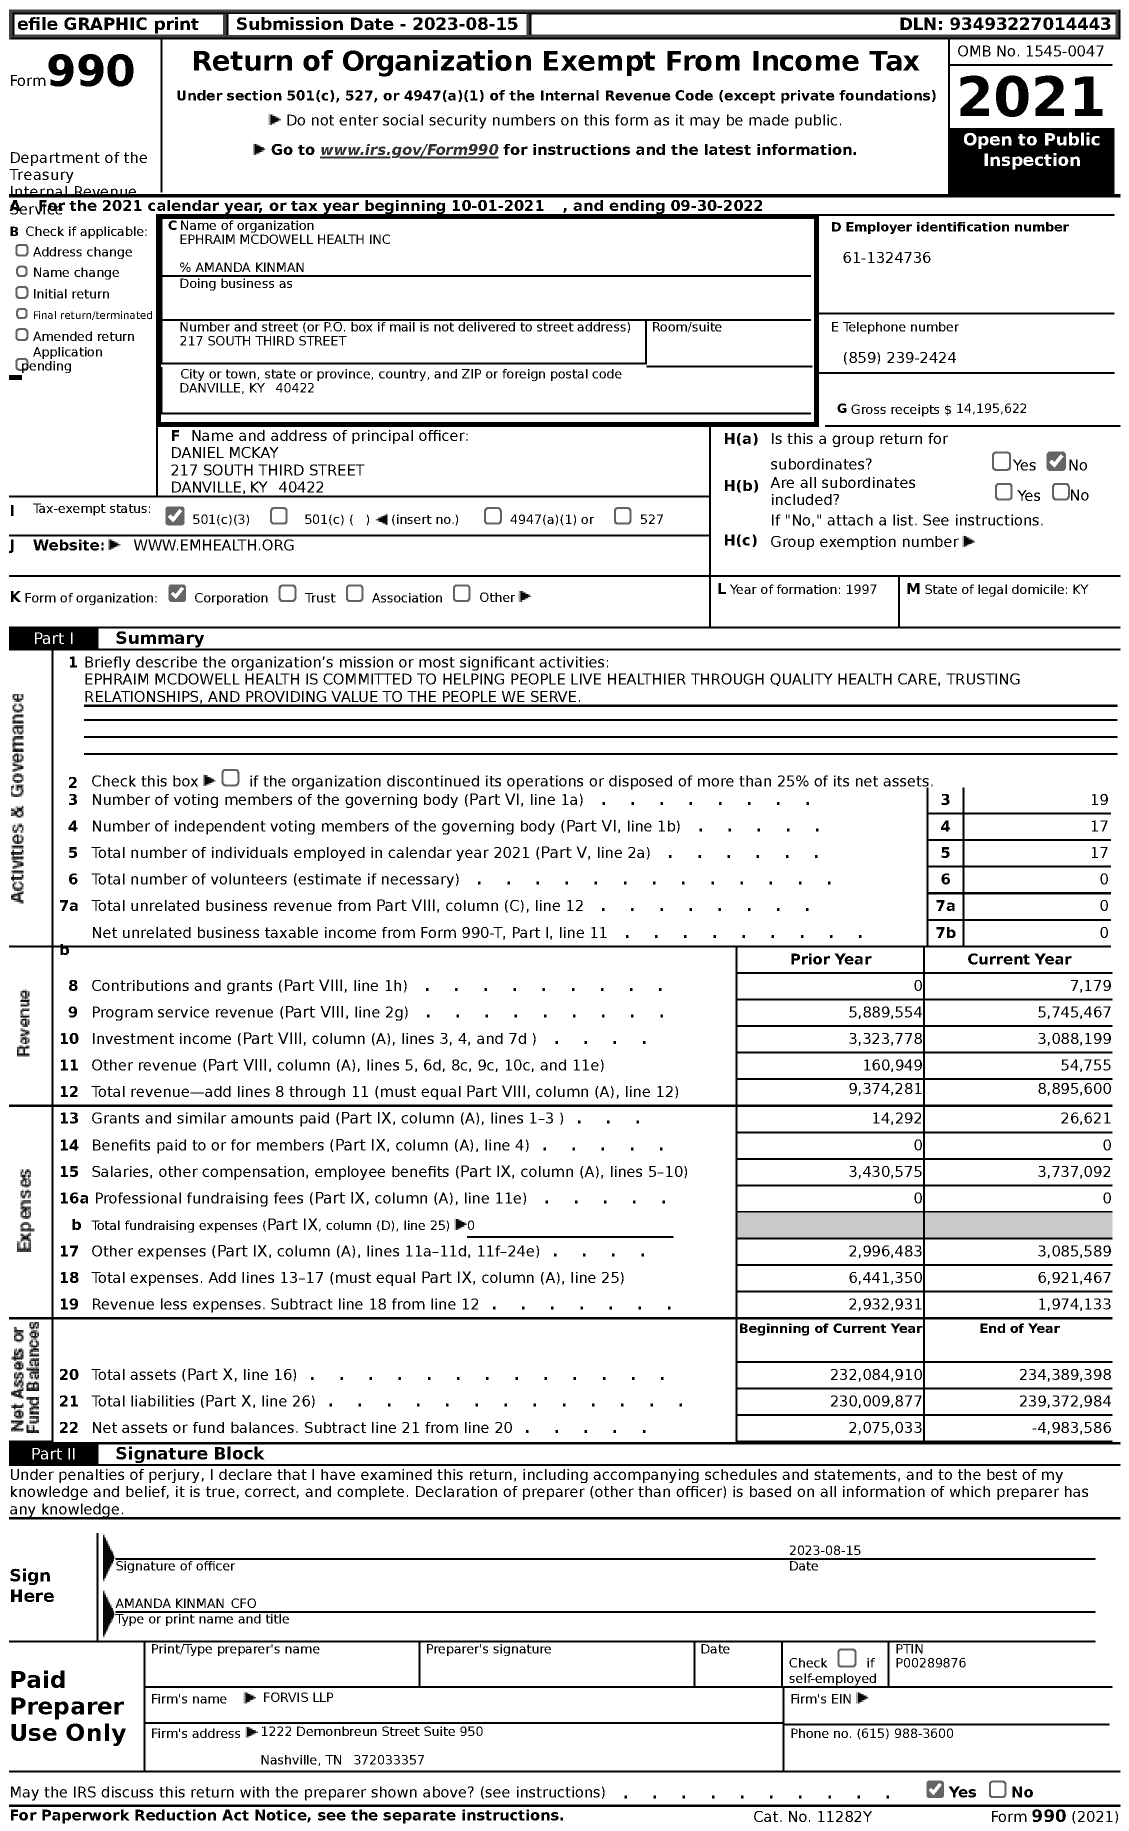 Image of first page of 2021 Form 990 for Ephraim McDowell Health